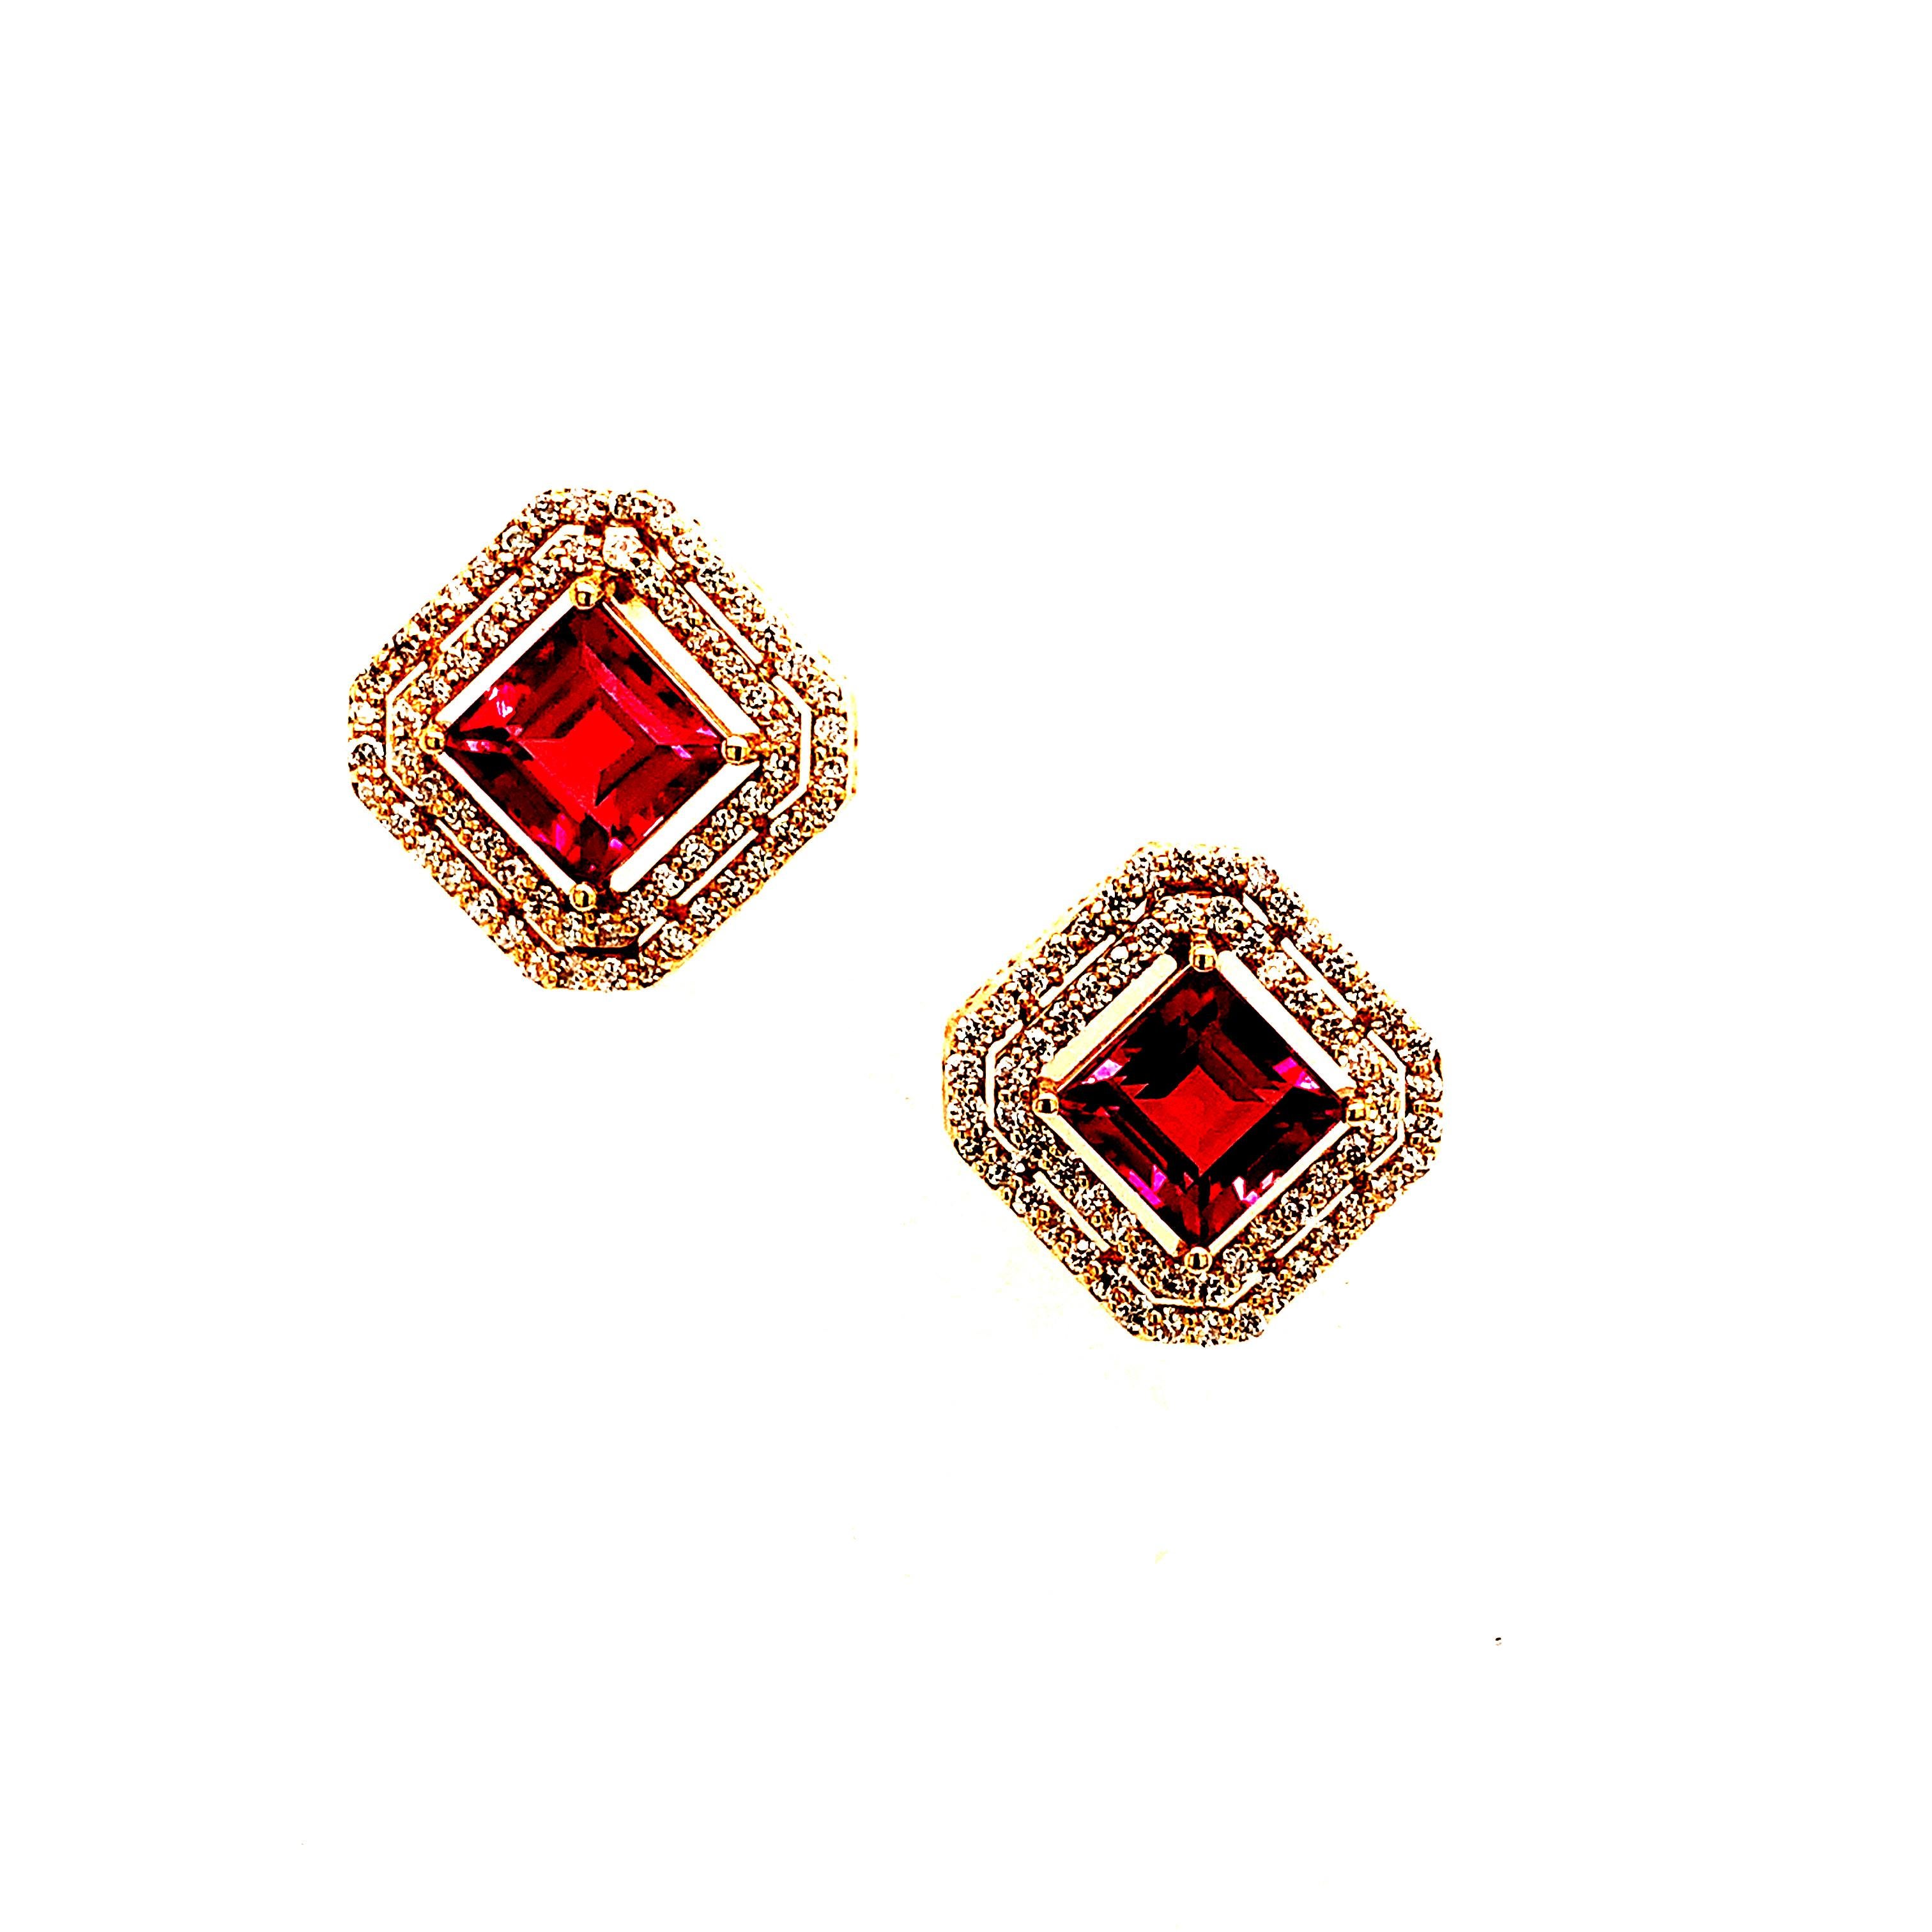 Natural Tourmaline Diamond Earrings 14k Gold 4.47 TCW Certified In New Condition For Sale In Brooklyn, NY